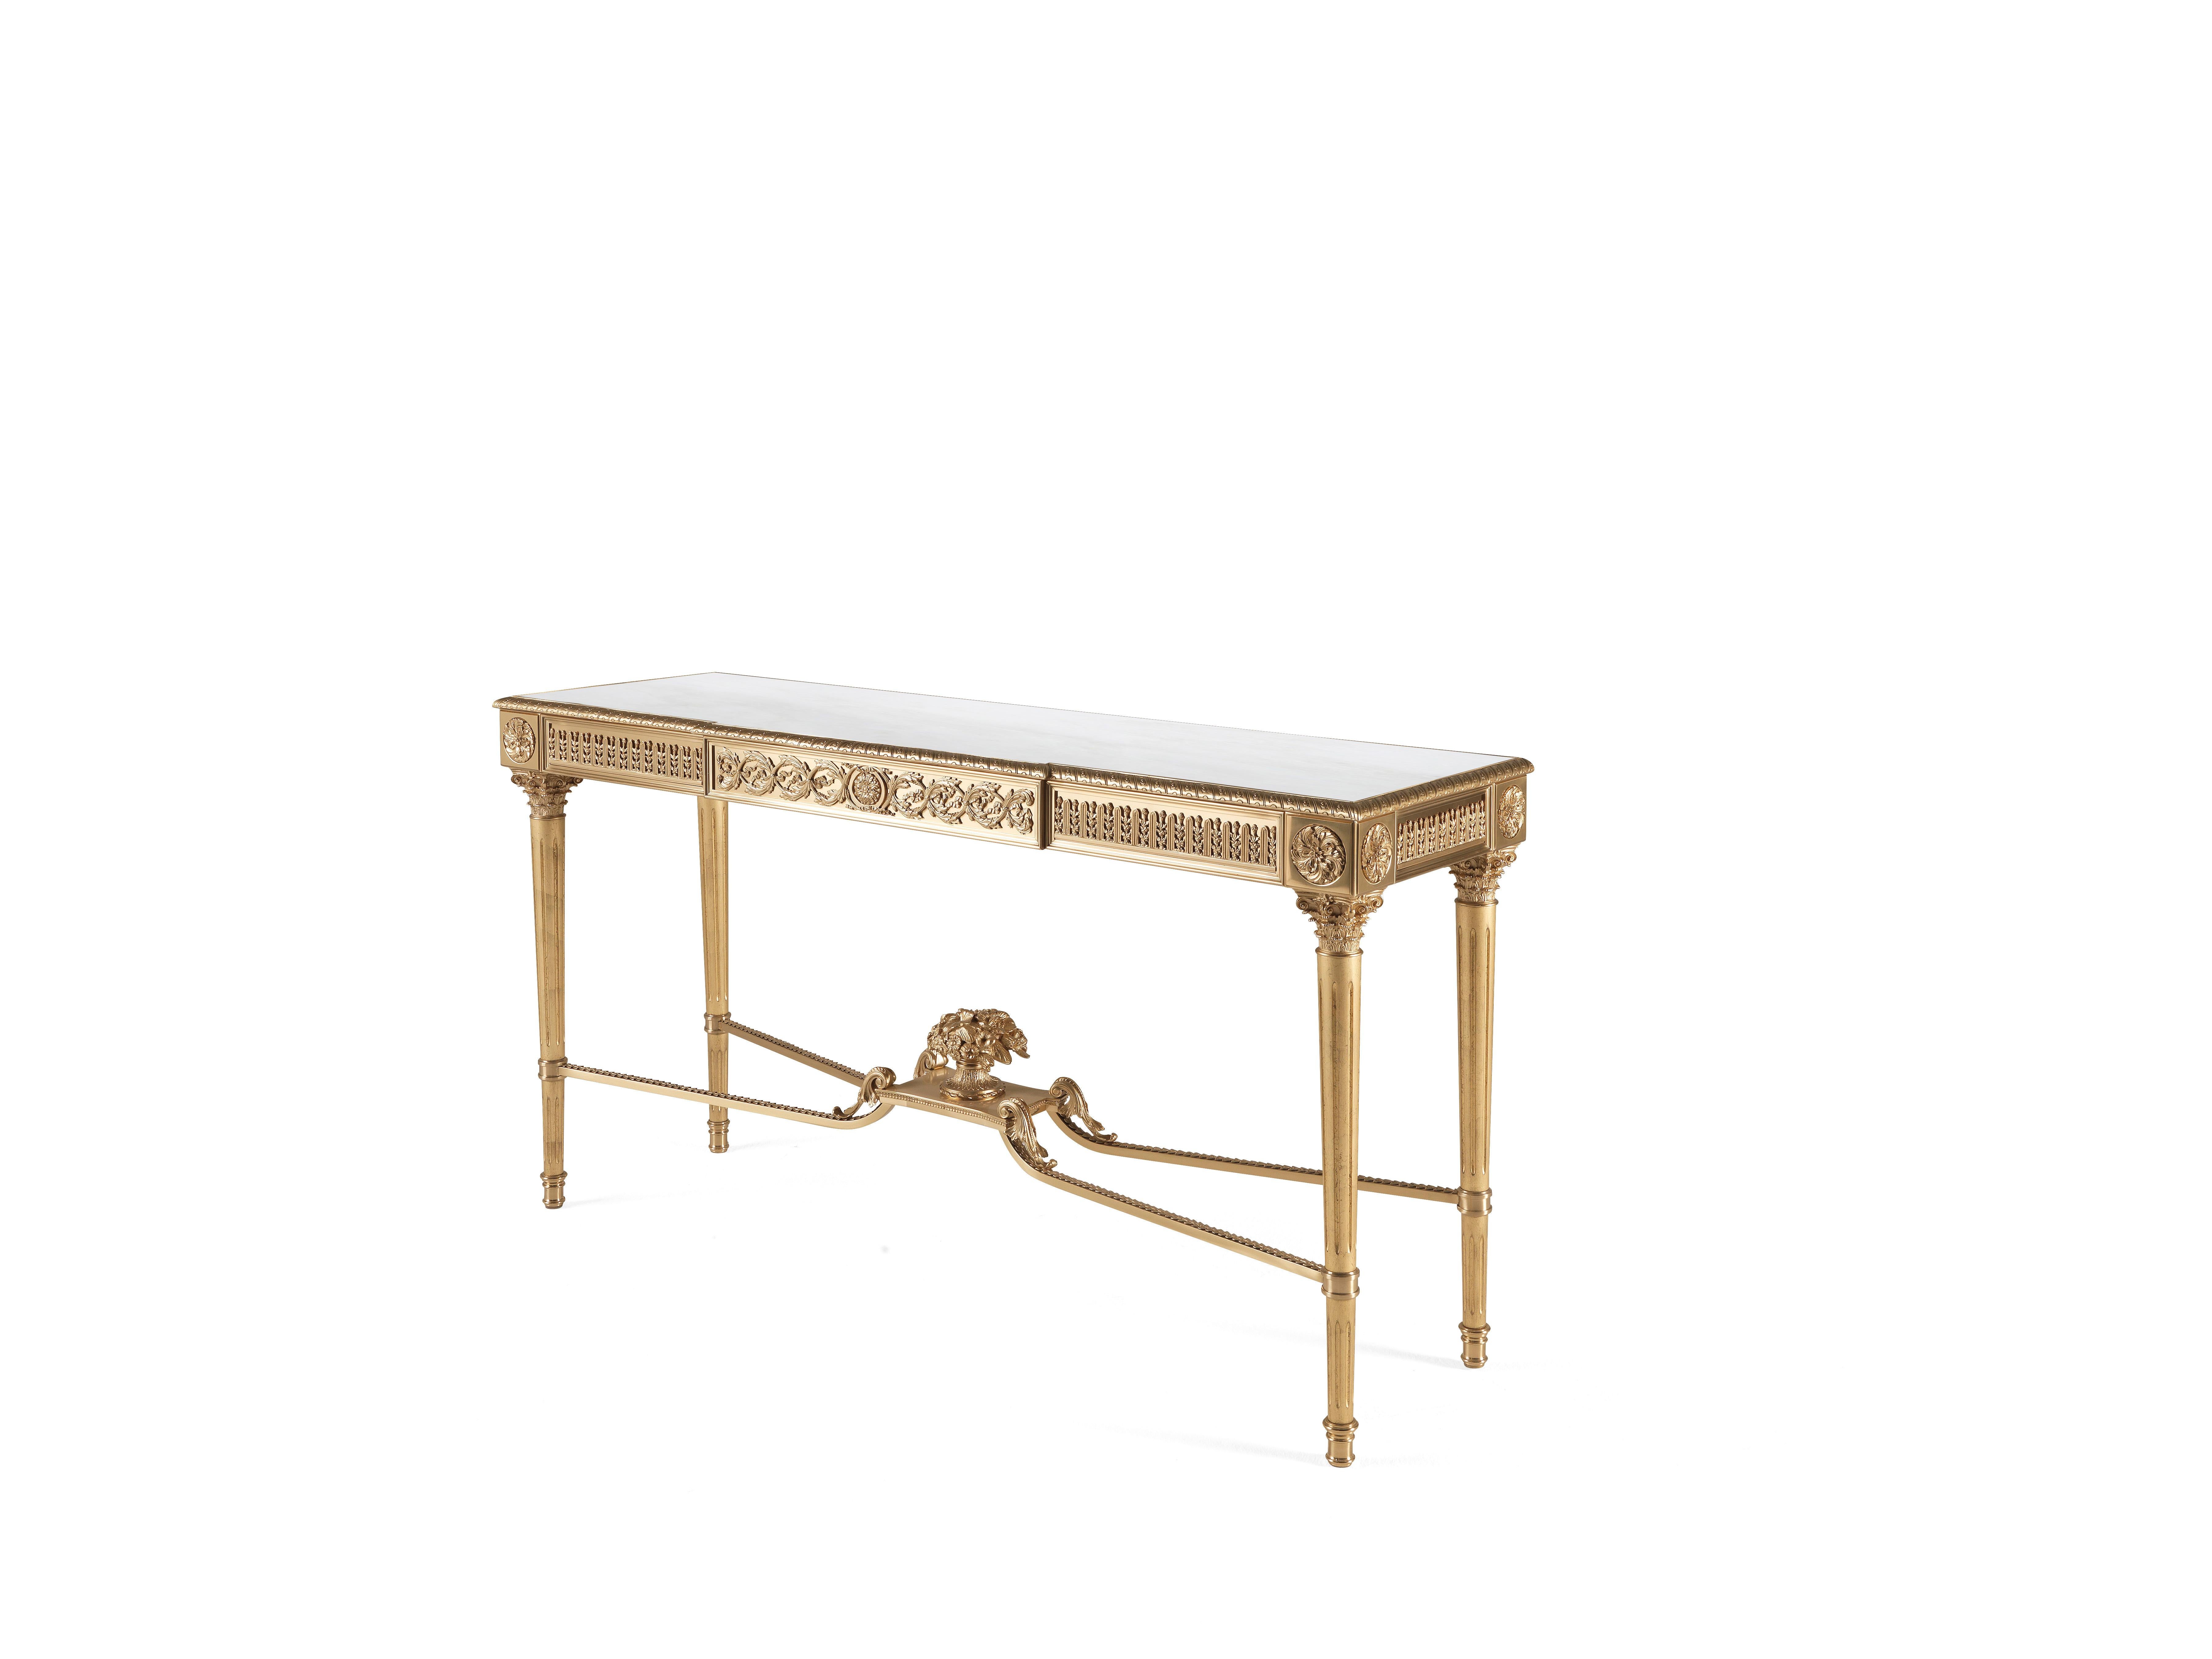 Perfect expression of manual and artistic skill, Shogun is made of brass with lost-wax cast brass details. The piece of furniture is characterized by finely carved legs with gold finishing and a cross that ends with an elegant central cup. The top